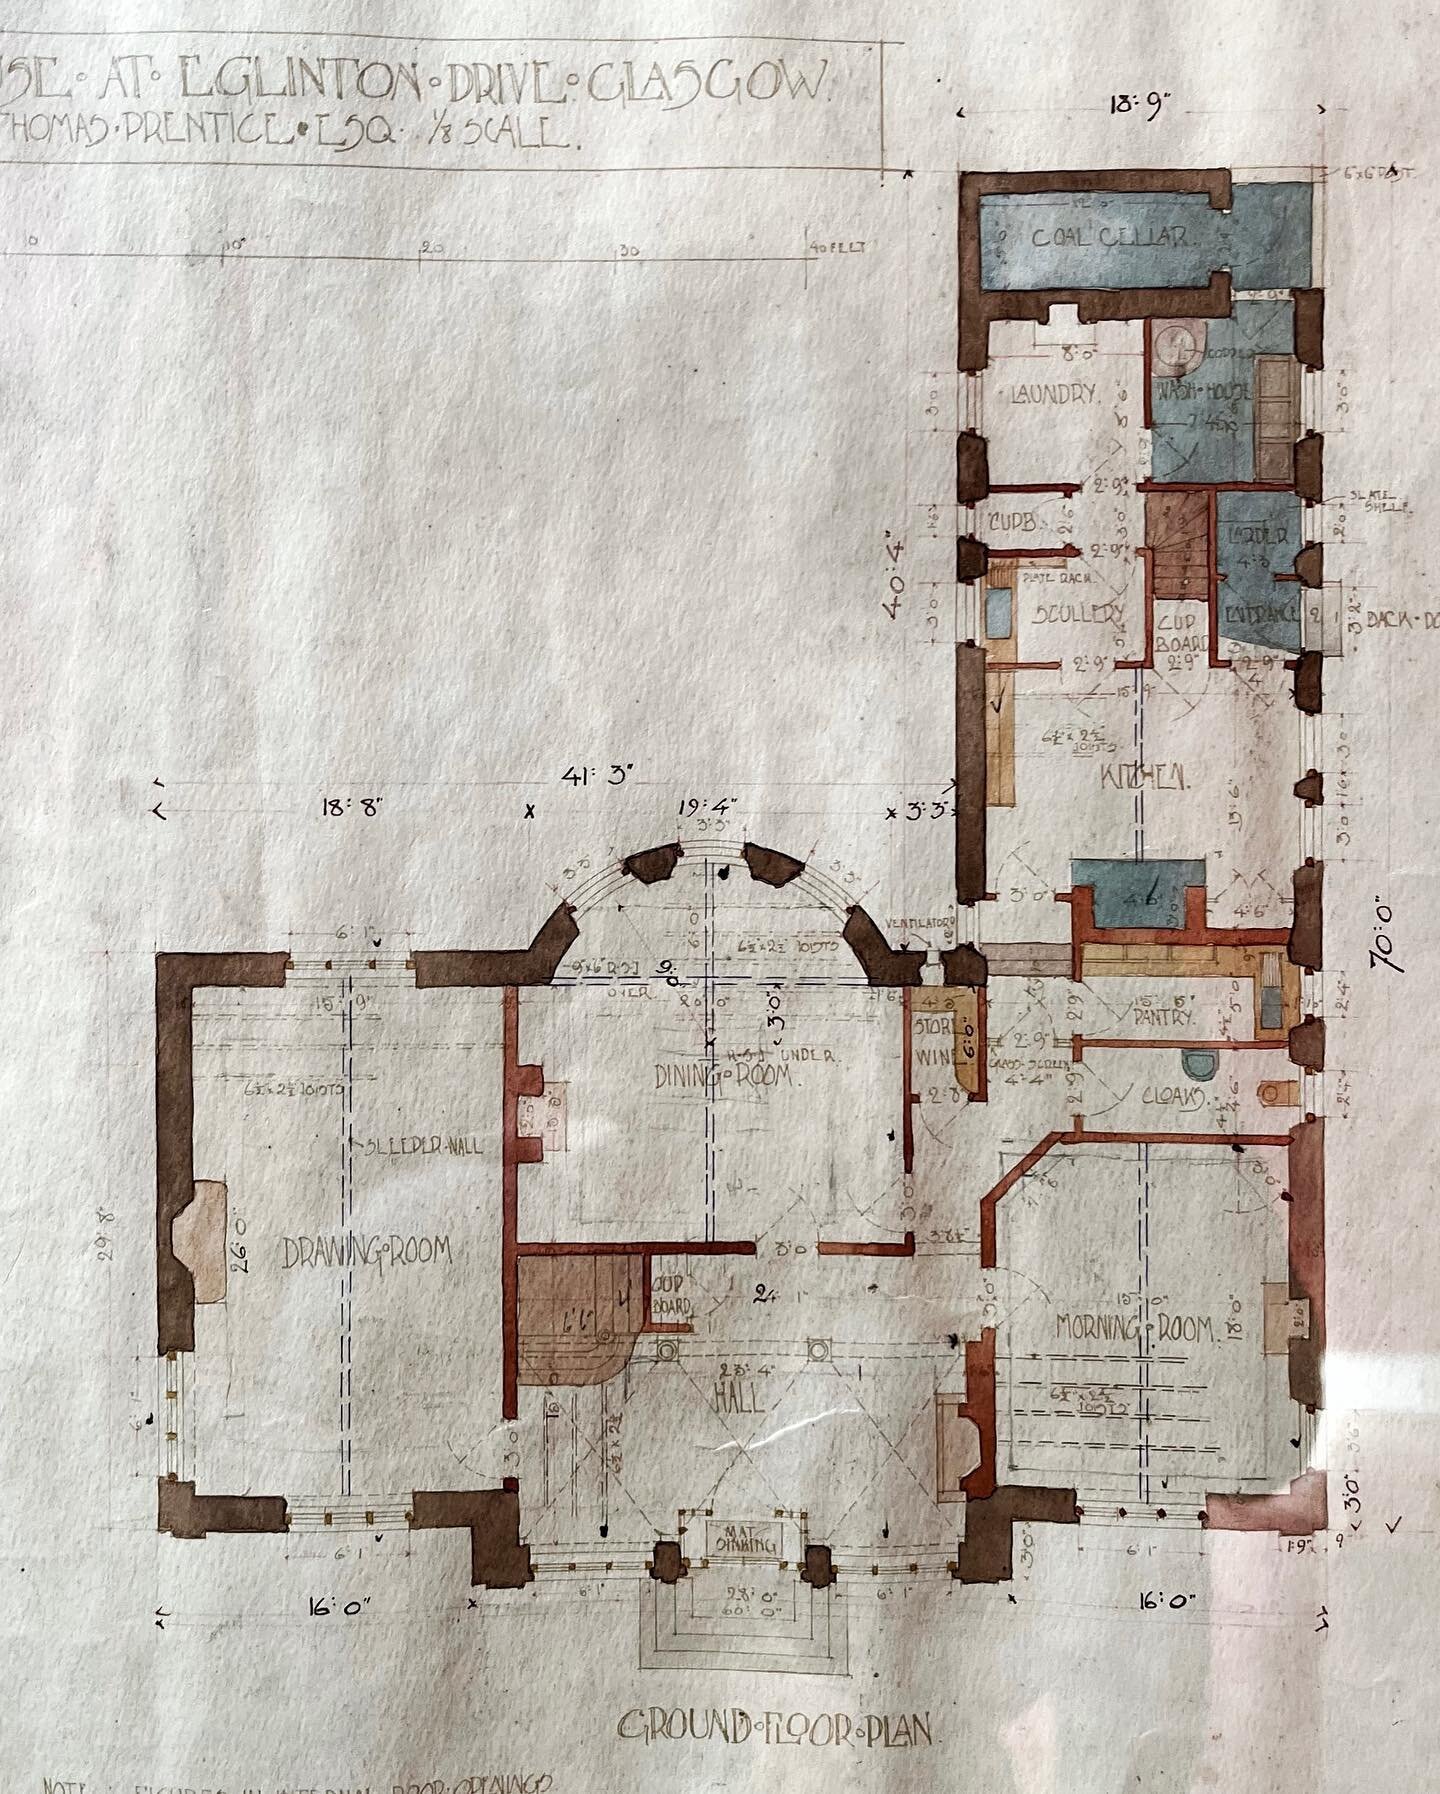 ALTERATIONS // CLEVEDEN GARDENS 

We are delighted to have started the design process on this incredible Grade A listed Edwardian Renaissance villa in Glasgow&rsquo;s West end. 

The proposals will aim to sympathetically and carefully upgrade the exi